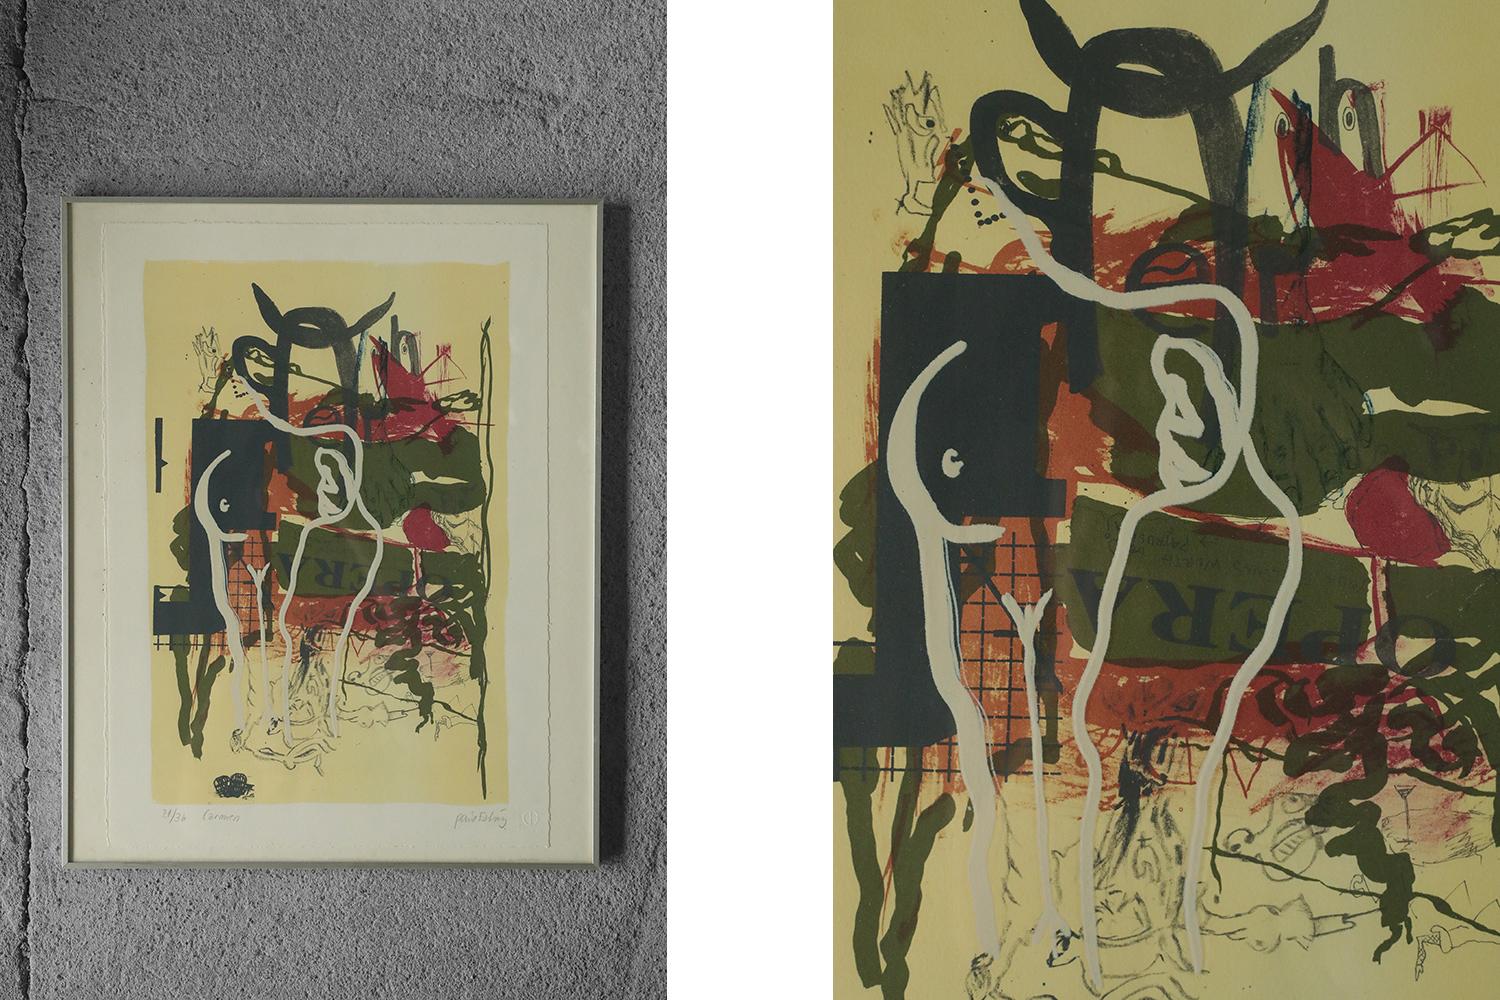 Paul Esting, Carmen
Color lithography
Number 21/36
Work with signature and individual number and title (pencil)
Work dimensions 50/40
Framed work

Poul Esting is a Danish artist born in 1943. His works are dynamic, often in surprising tones.